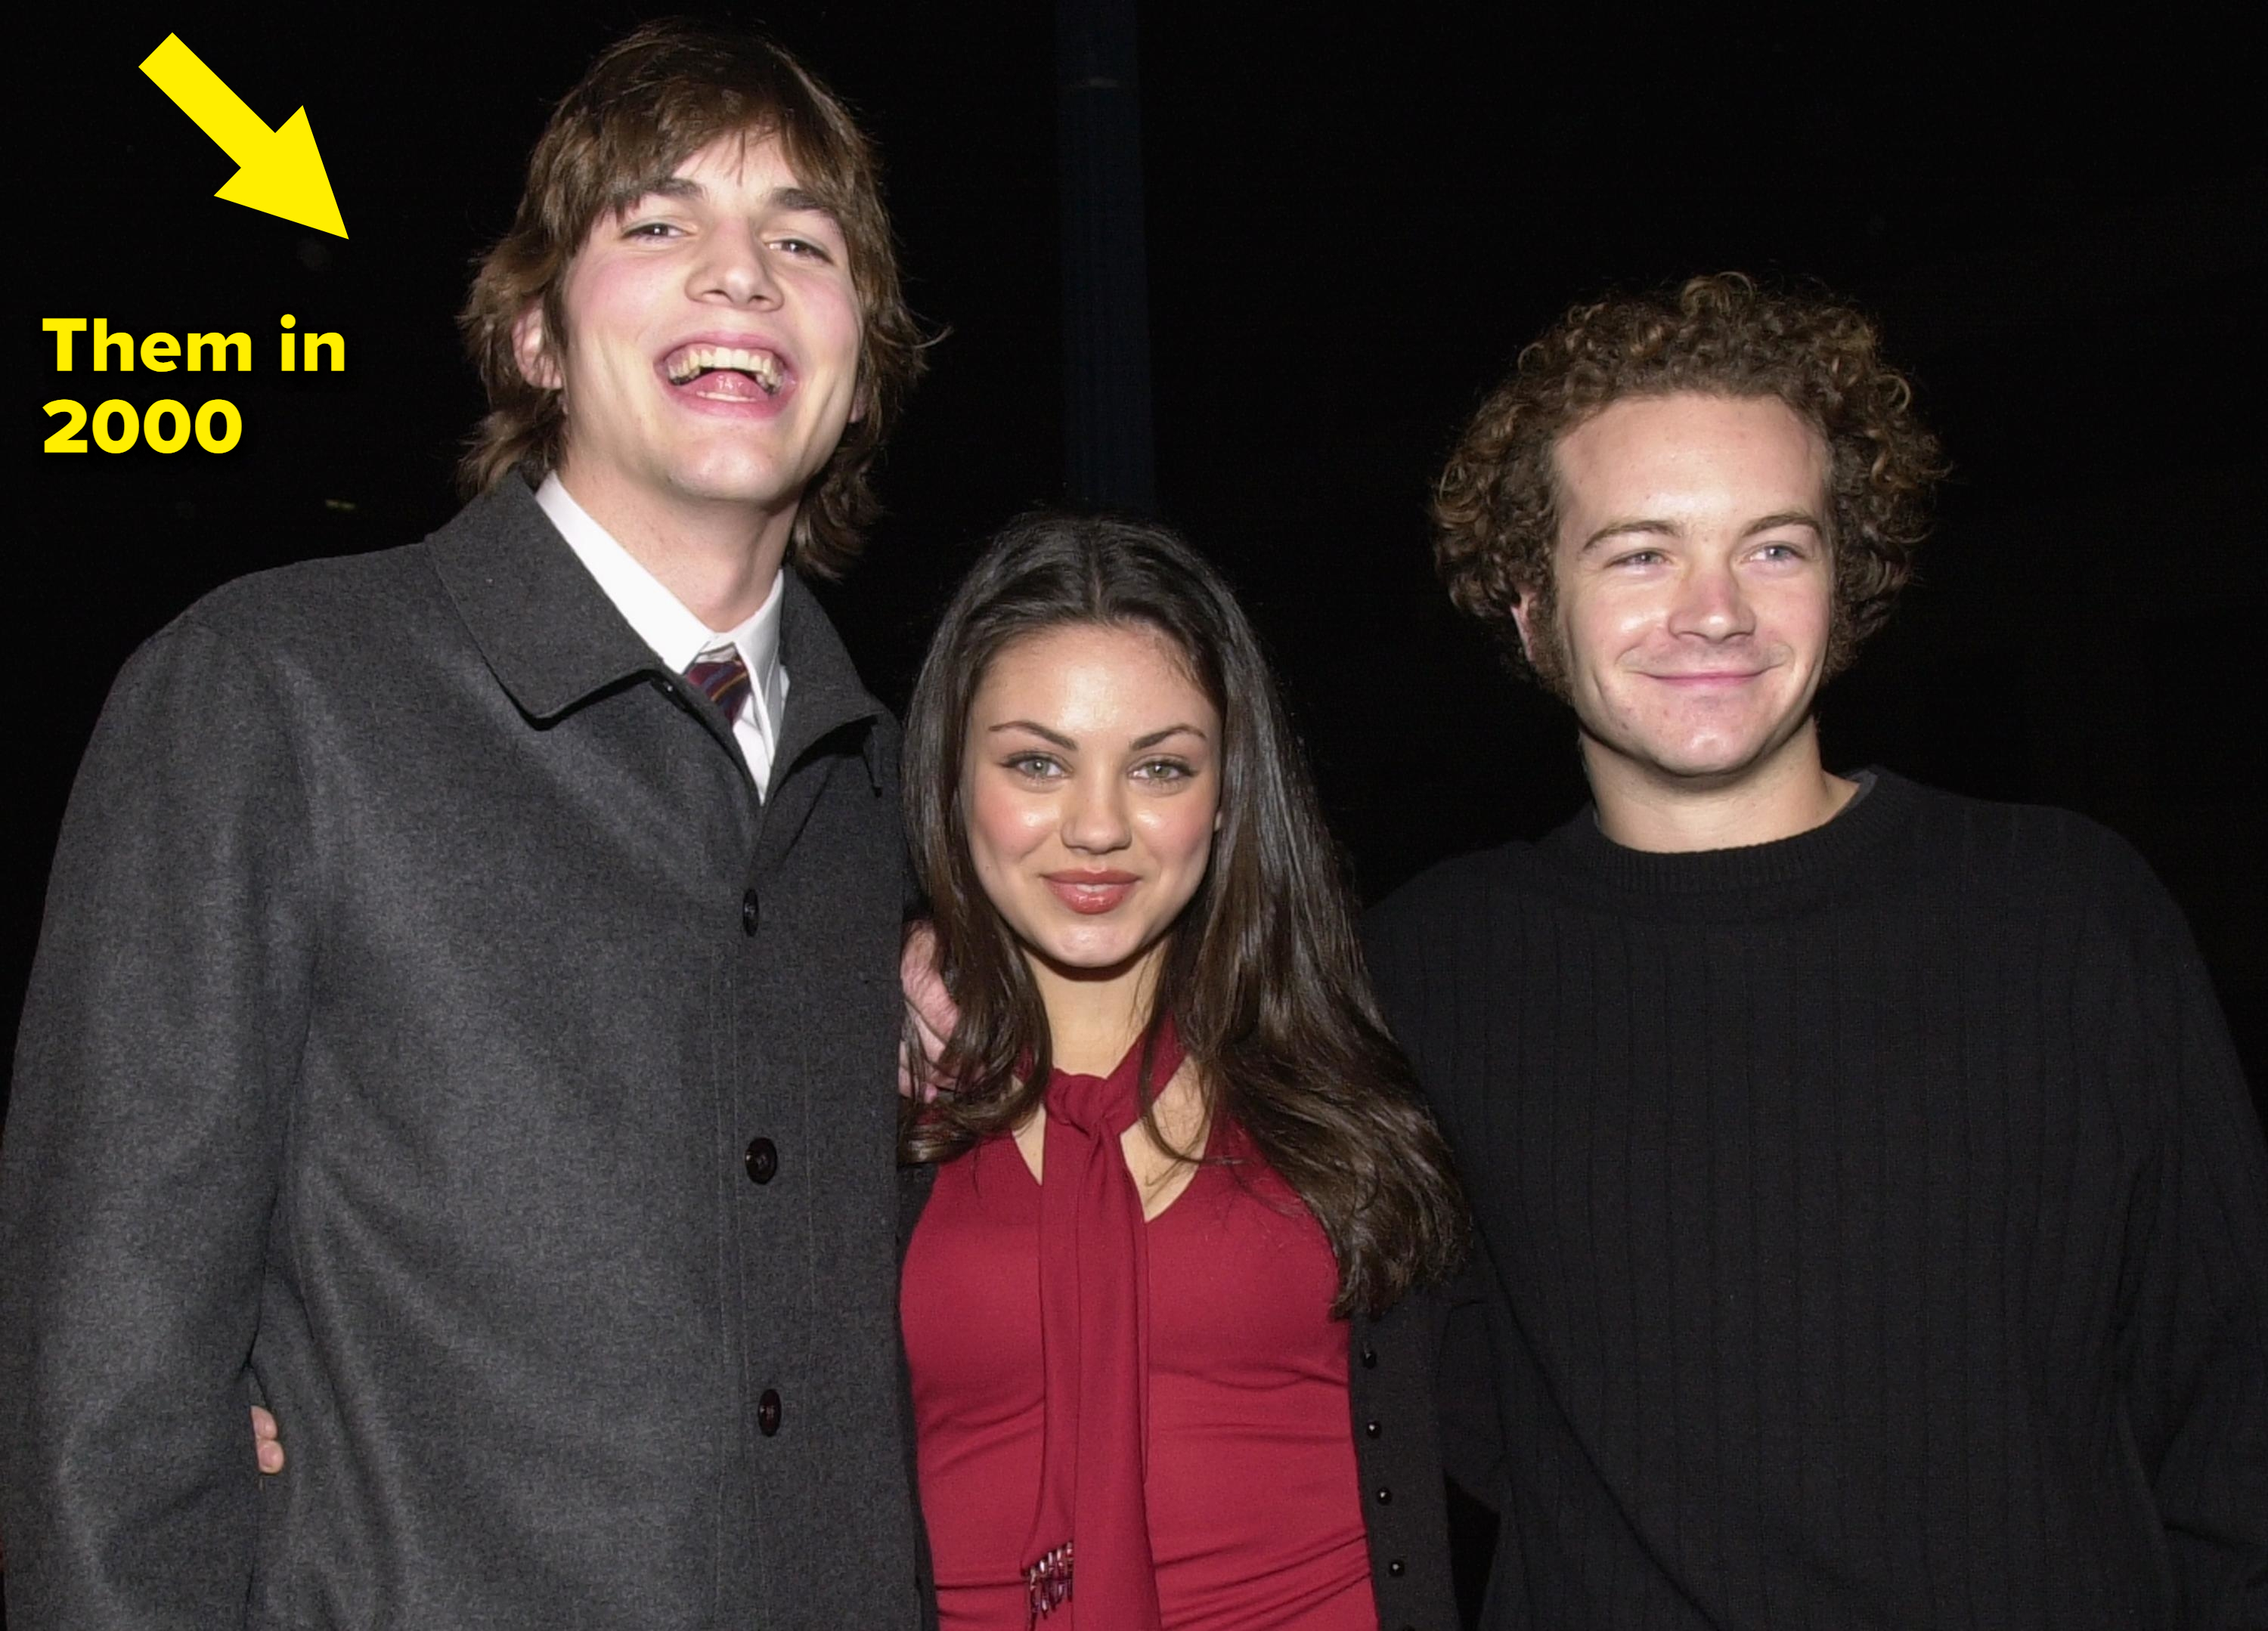 A closeup of the Ashton, Mila, and Danny in 2000